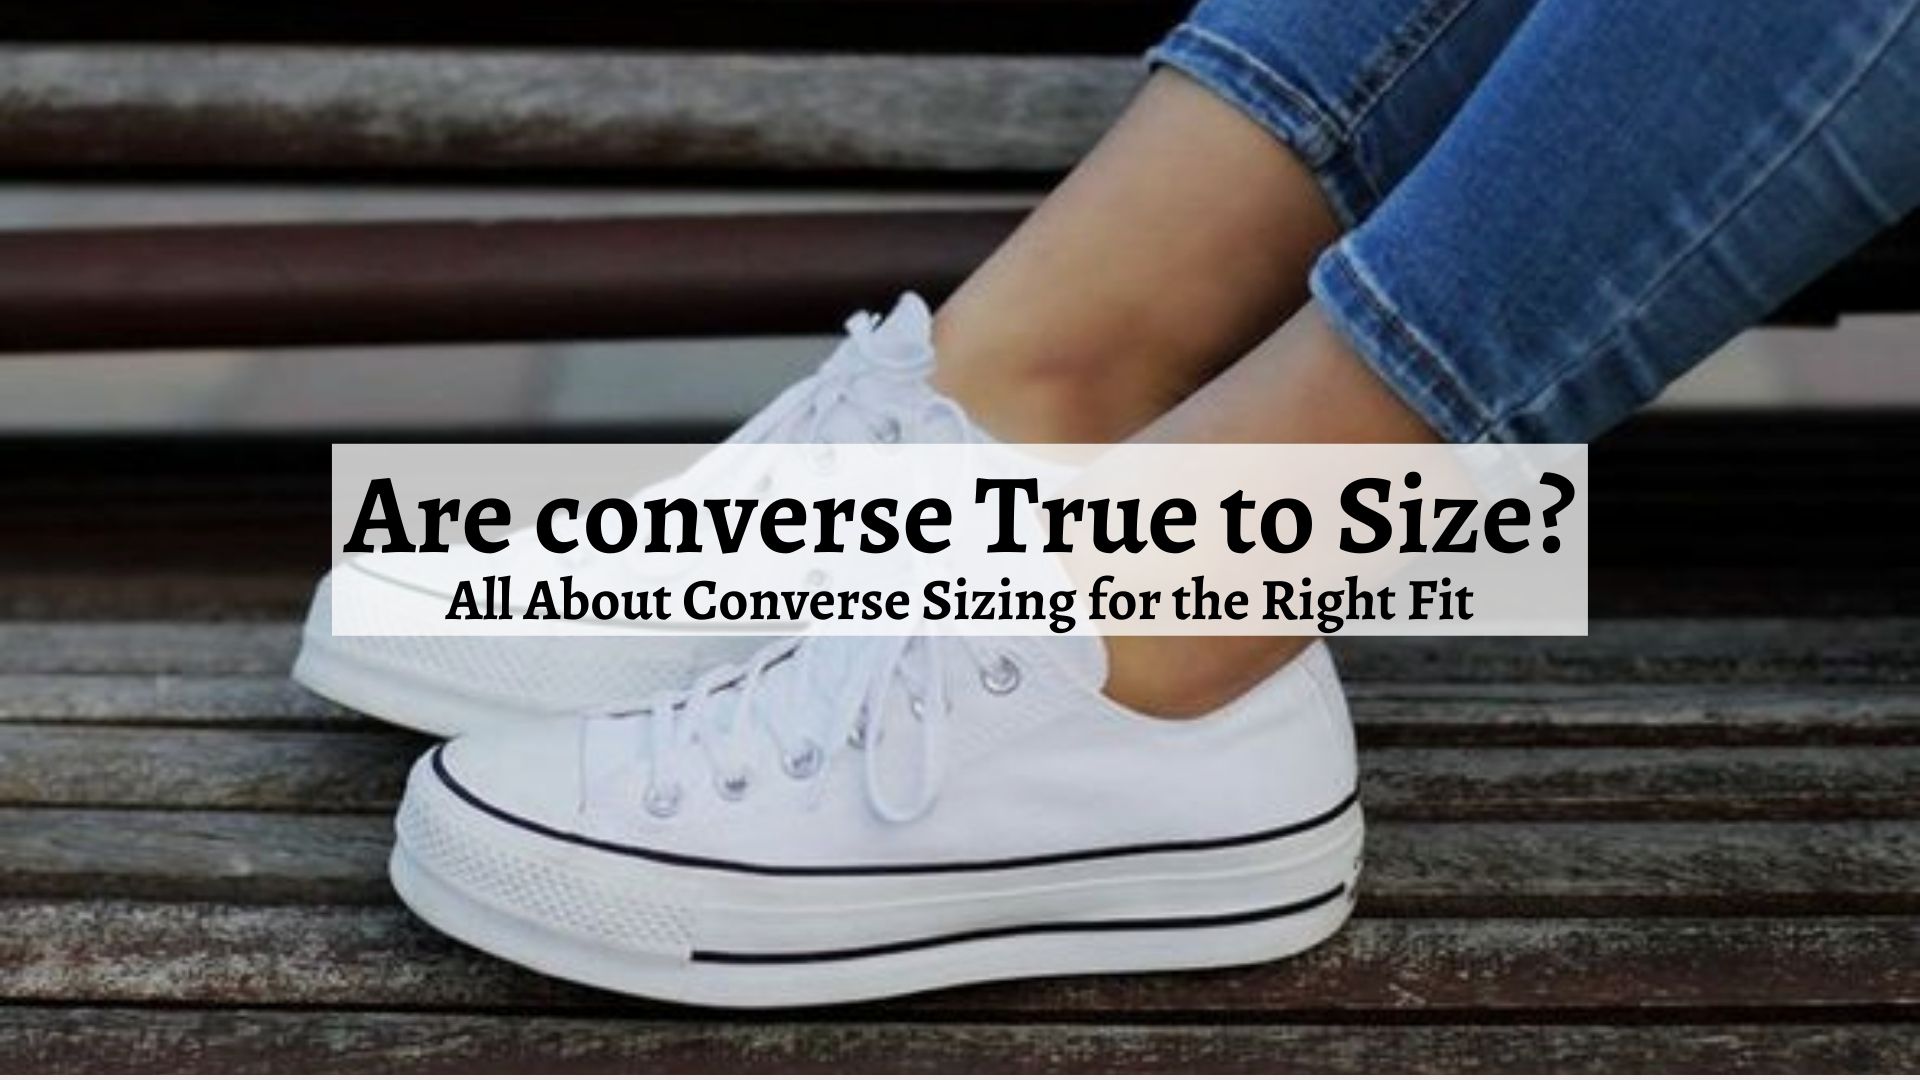 are-converse-true-to-size-all-about-converse-sizing-for-the-right-fit-shoe-filter